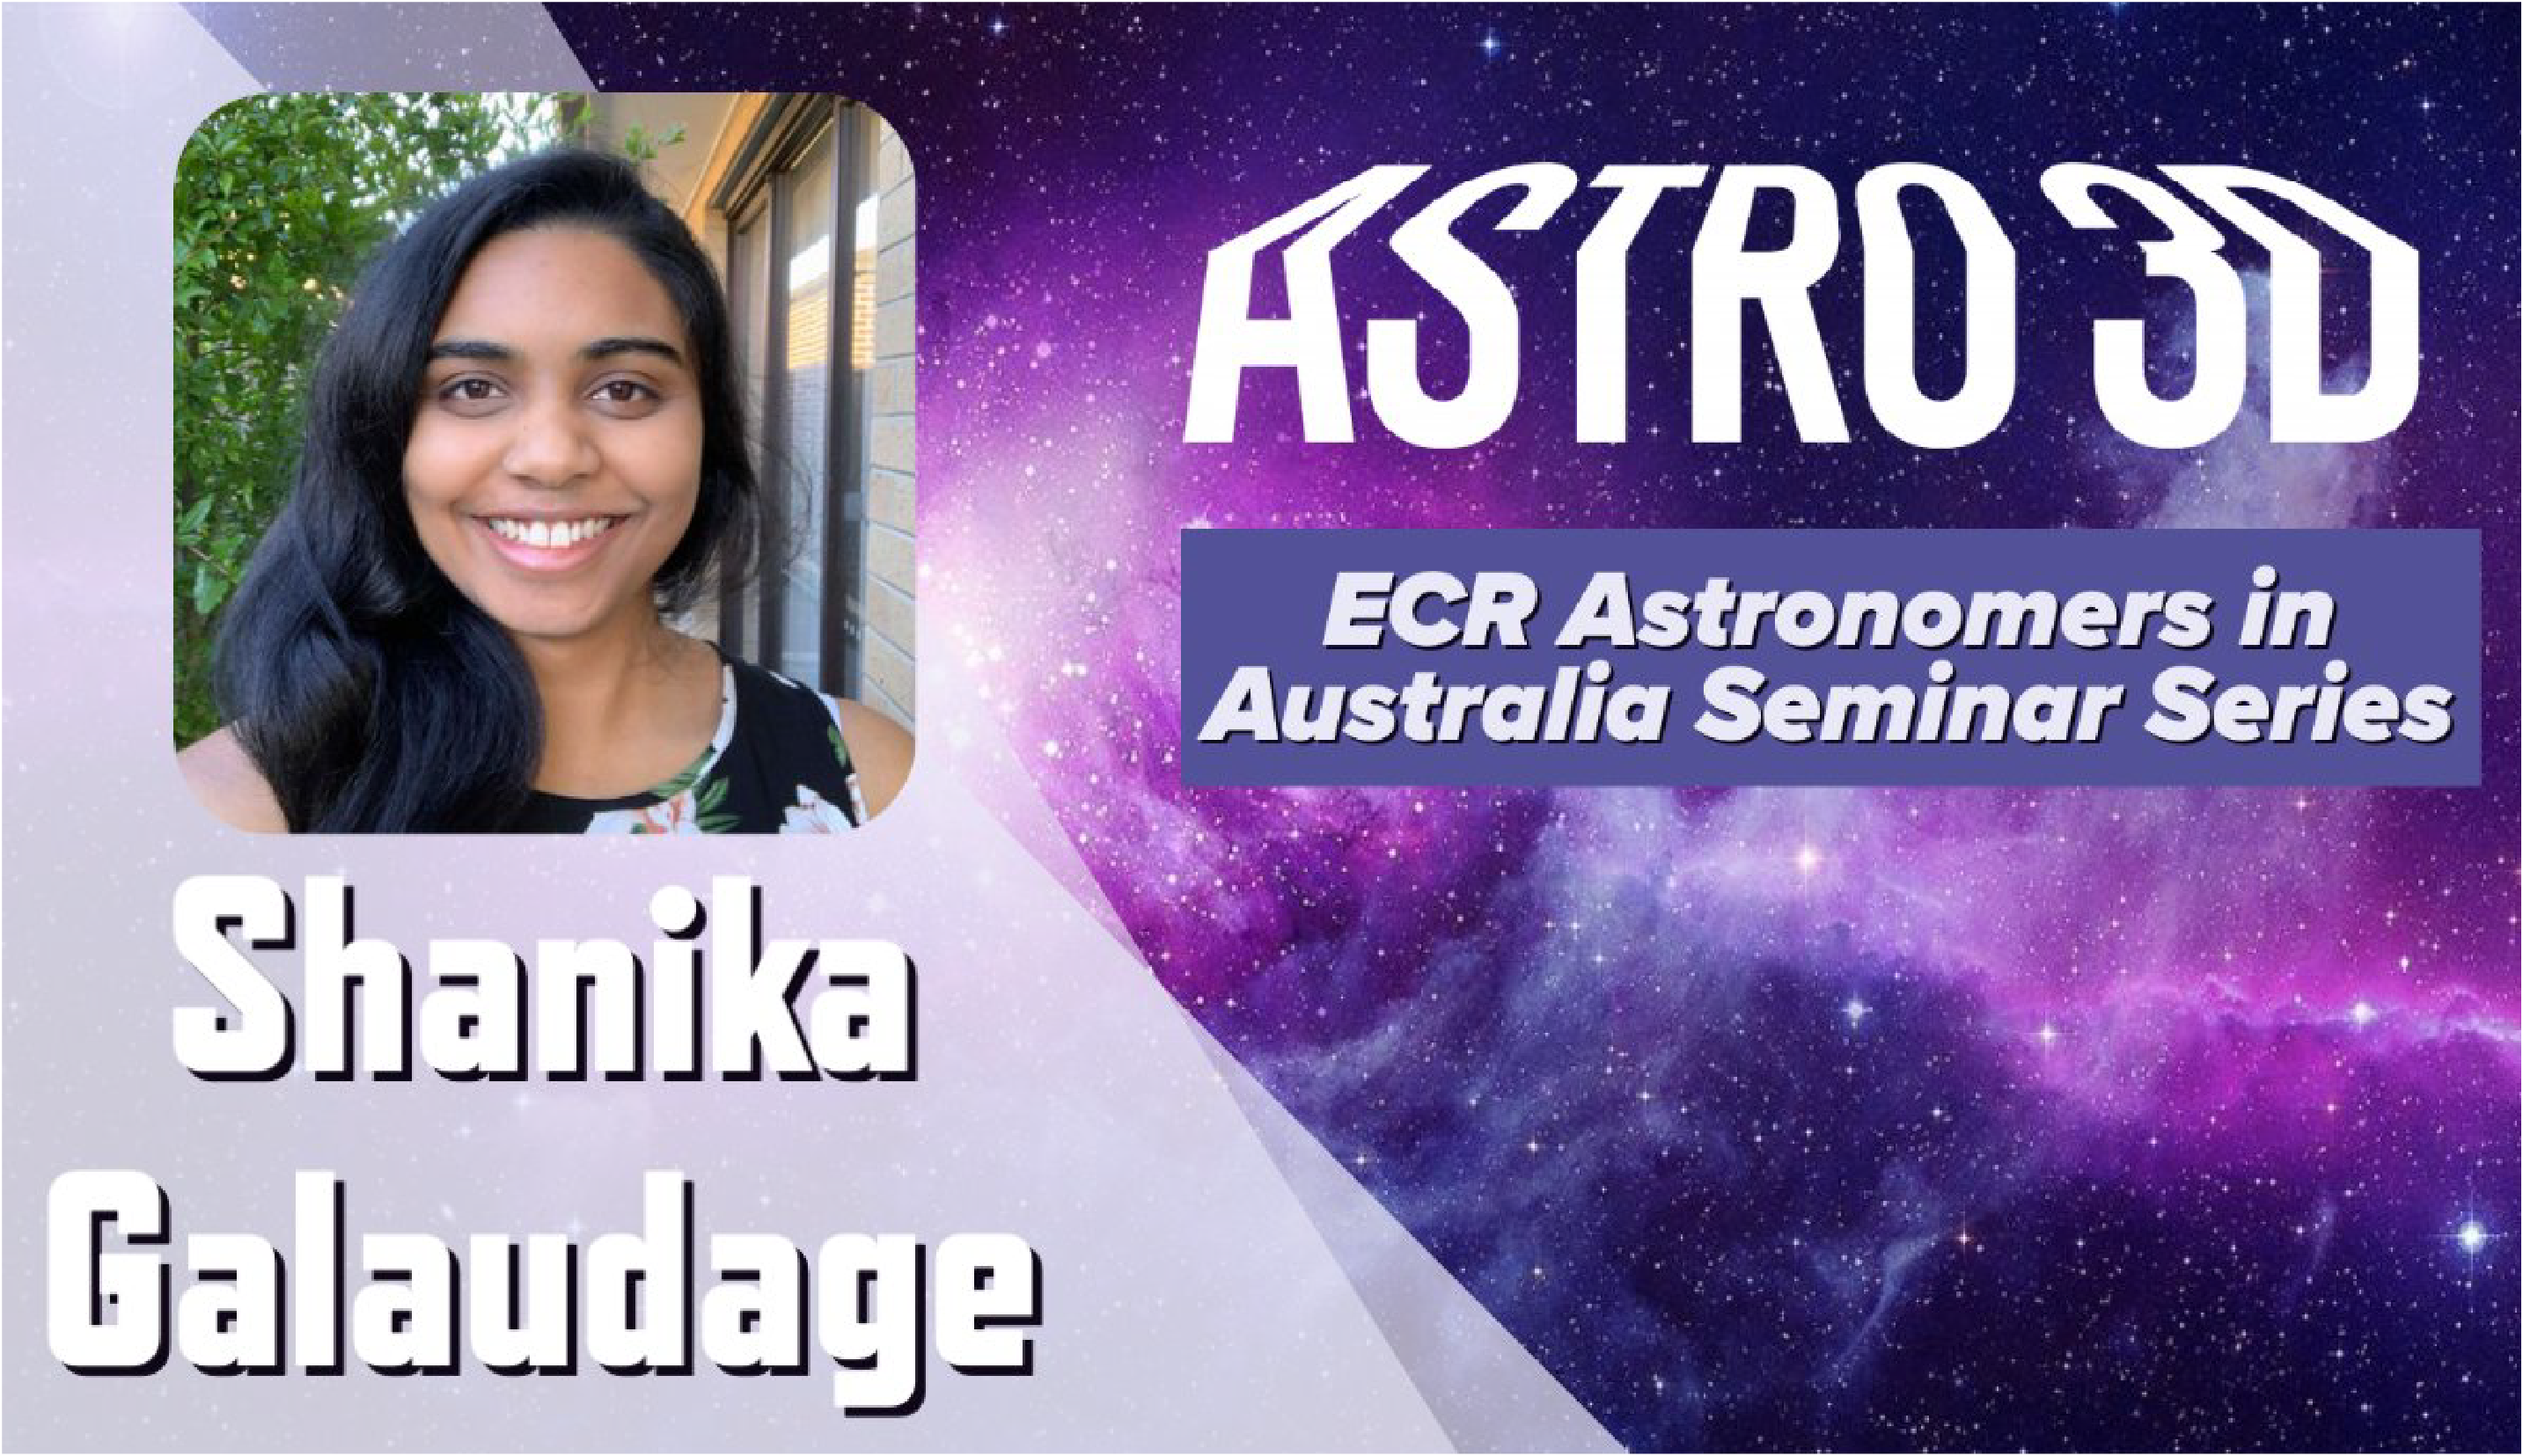 Graphic with a profile image of a woman on the left with their name, Shanika Galaudage, below it and Astro3D logo on the top right with text below that reads, ECR Astronomers in Australia Seminar series. The background in a purple and pink space image with lots of stars.